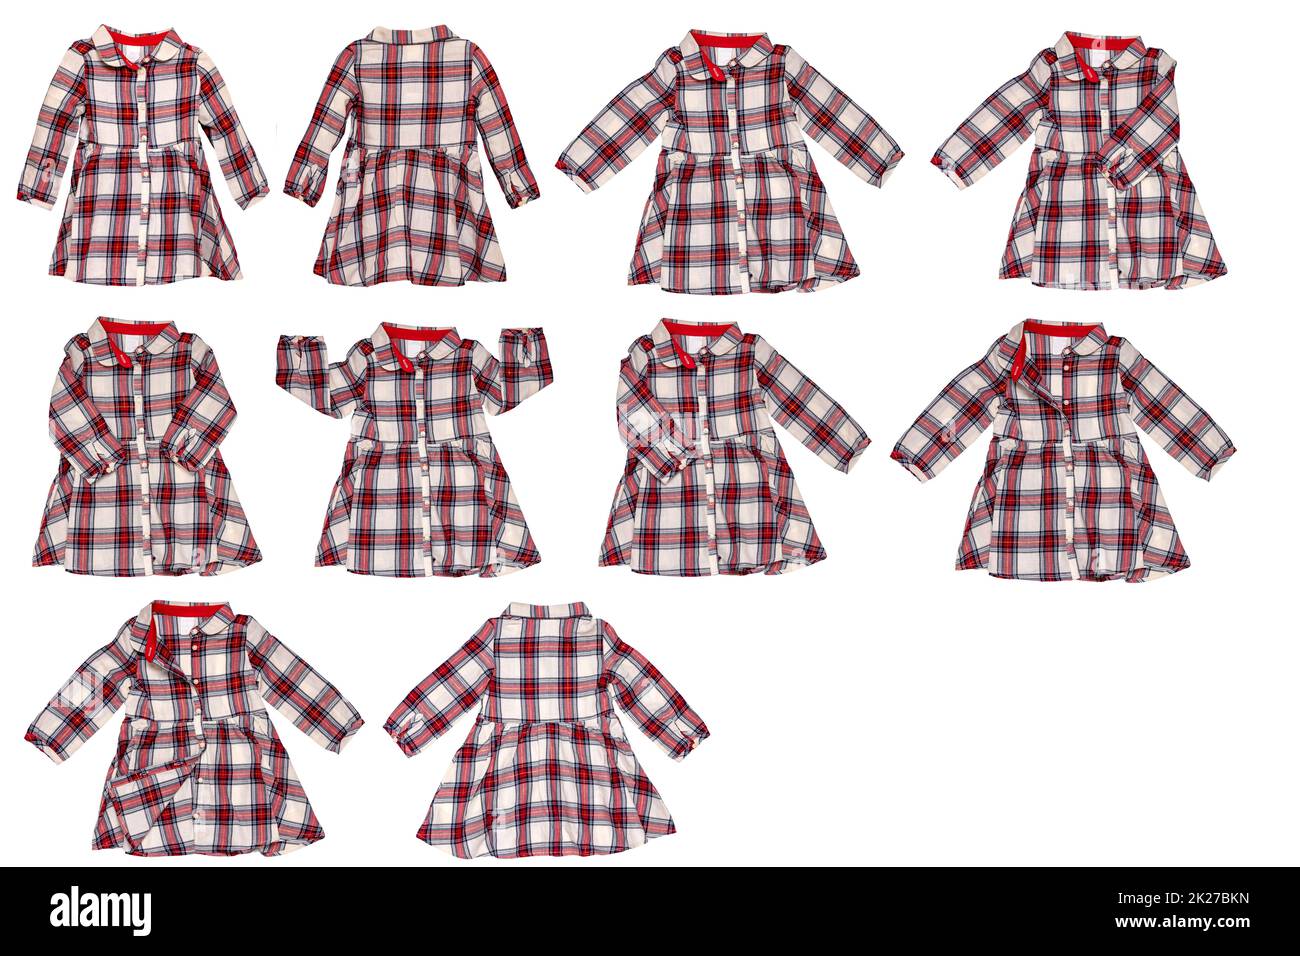 Collage set of little girls summer clothes isolated on a white background. Close-up of ten various views of a beautiful red white plaid dress isolated on a white background. Stock Photo